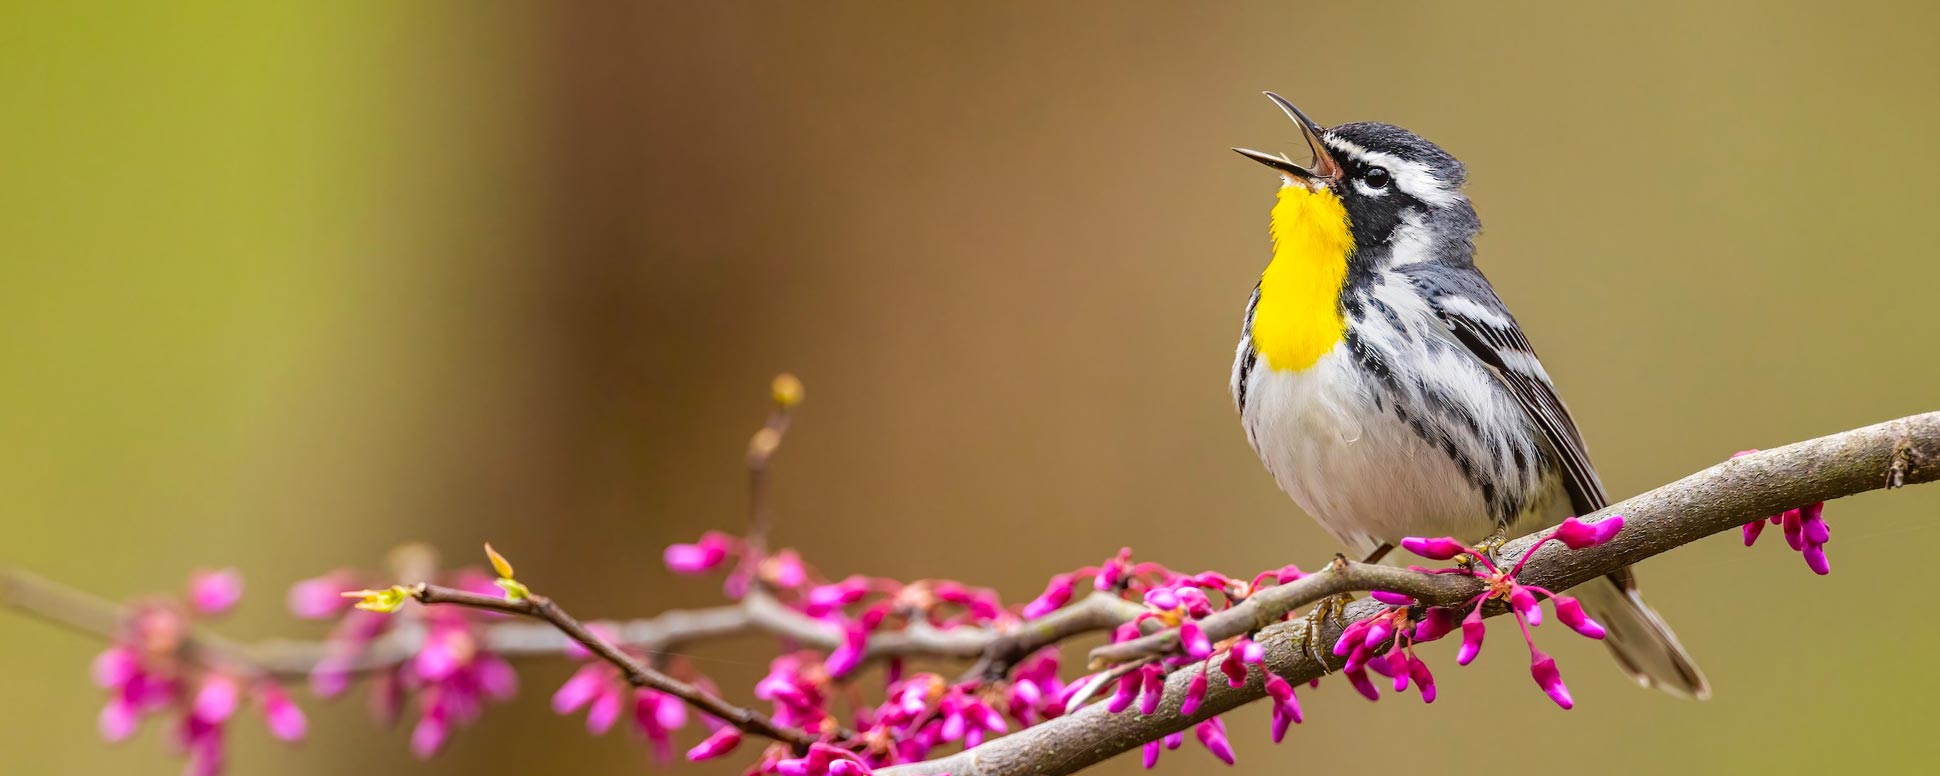 Yellow-throated Warbler on a branch